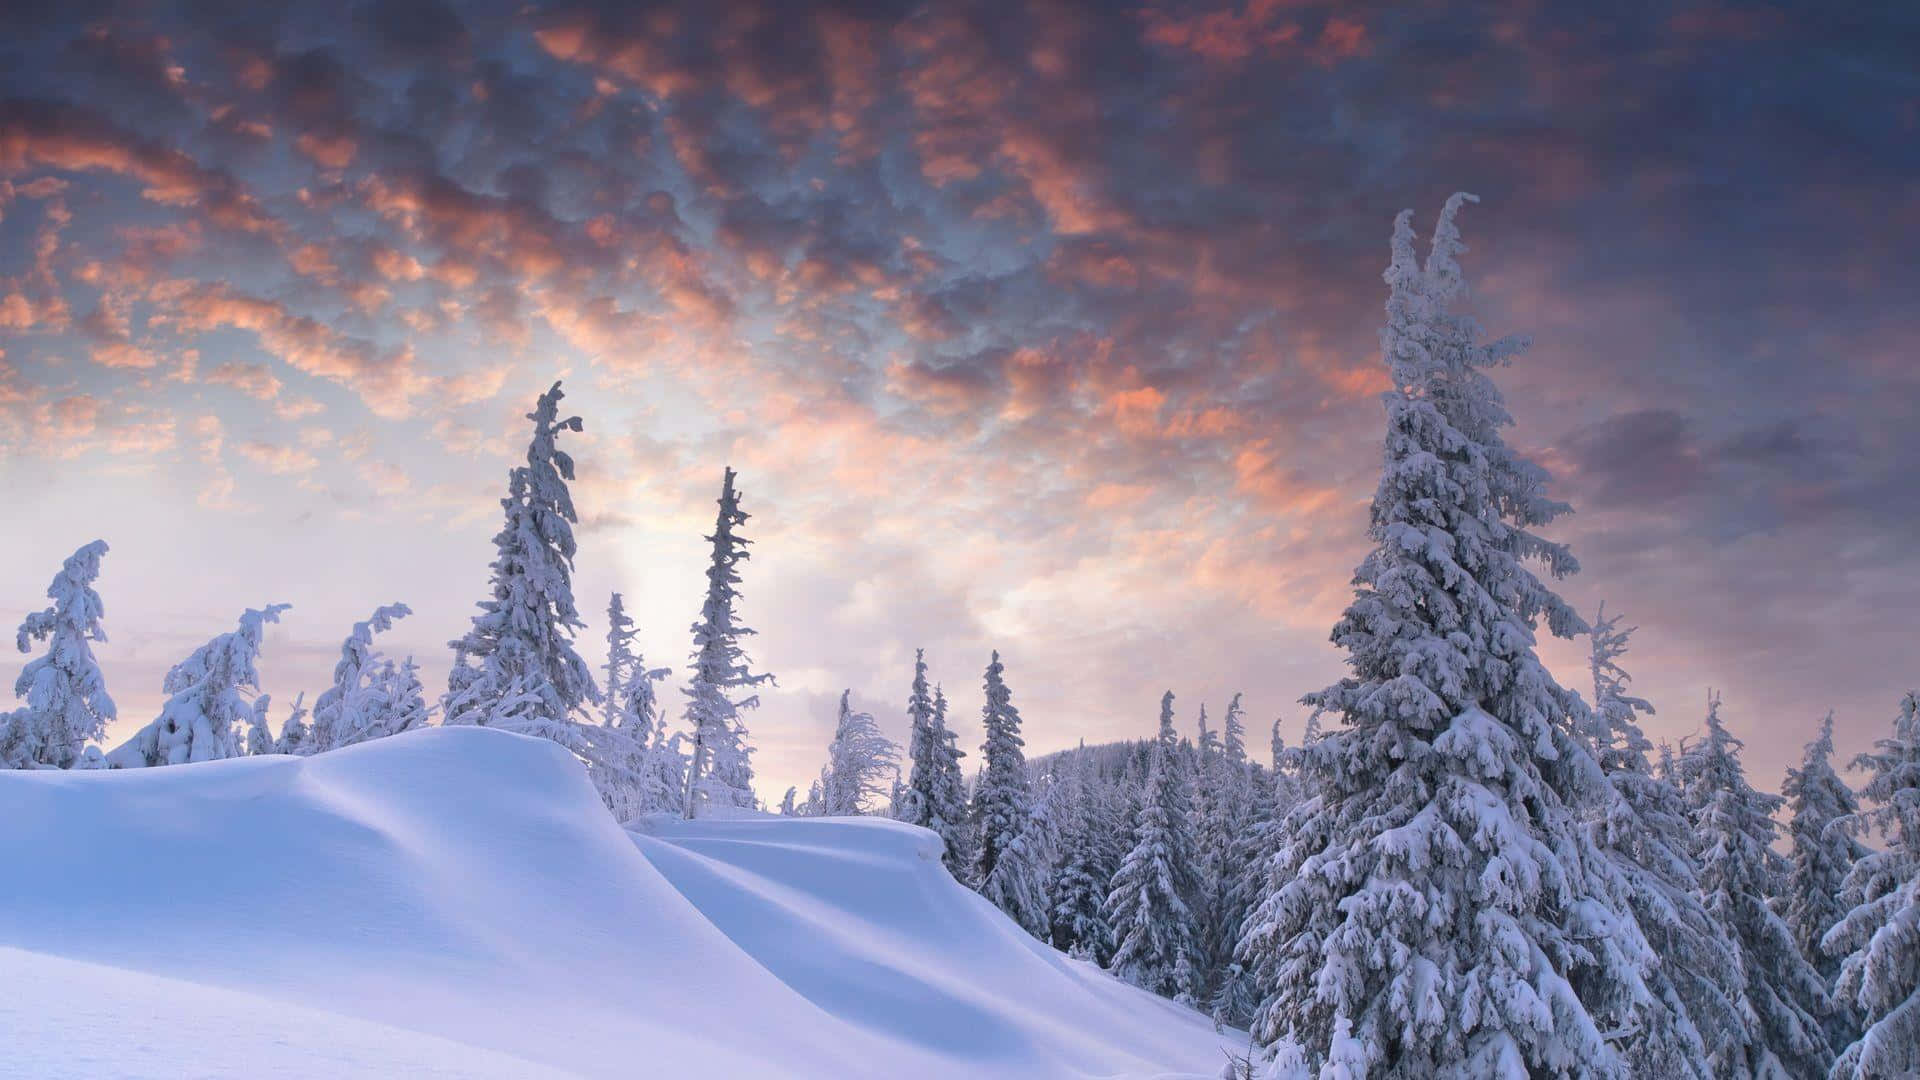 A Snow Covered Mountain With Trees And A Beautiful Sky